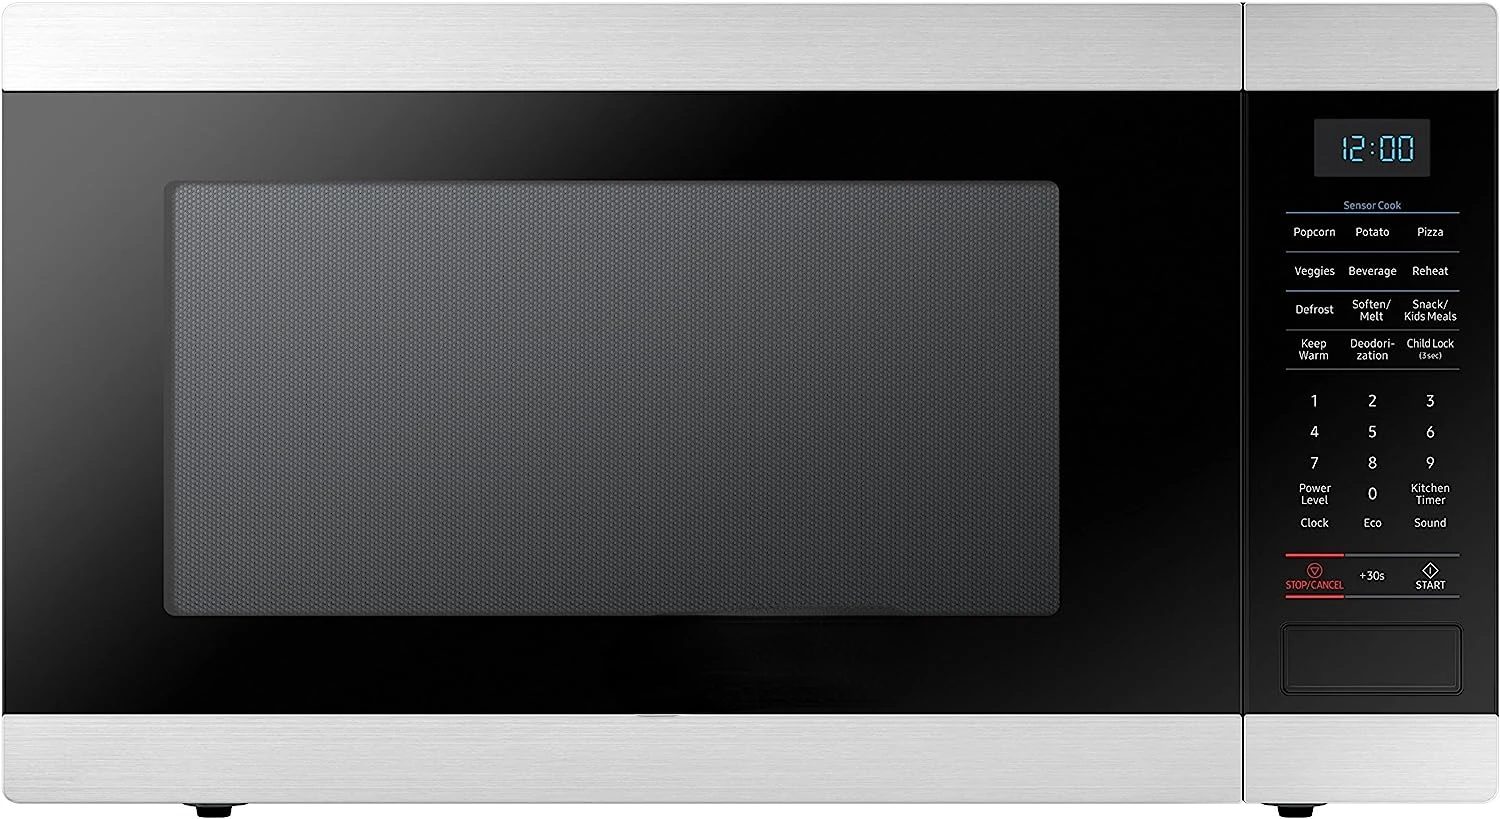 

MS19M8000AS/AA Large Capacity Countertop Microwave Oven with Sensor and Ceramic Enamel Interior, Stainless Steel, 1.9 cubic feet